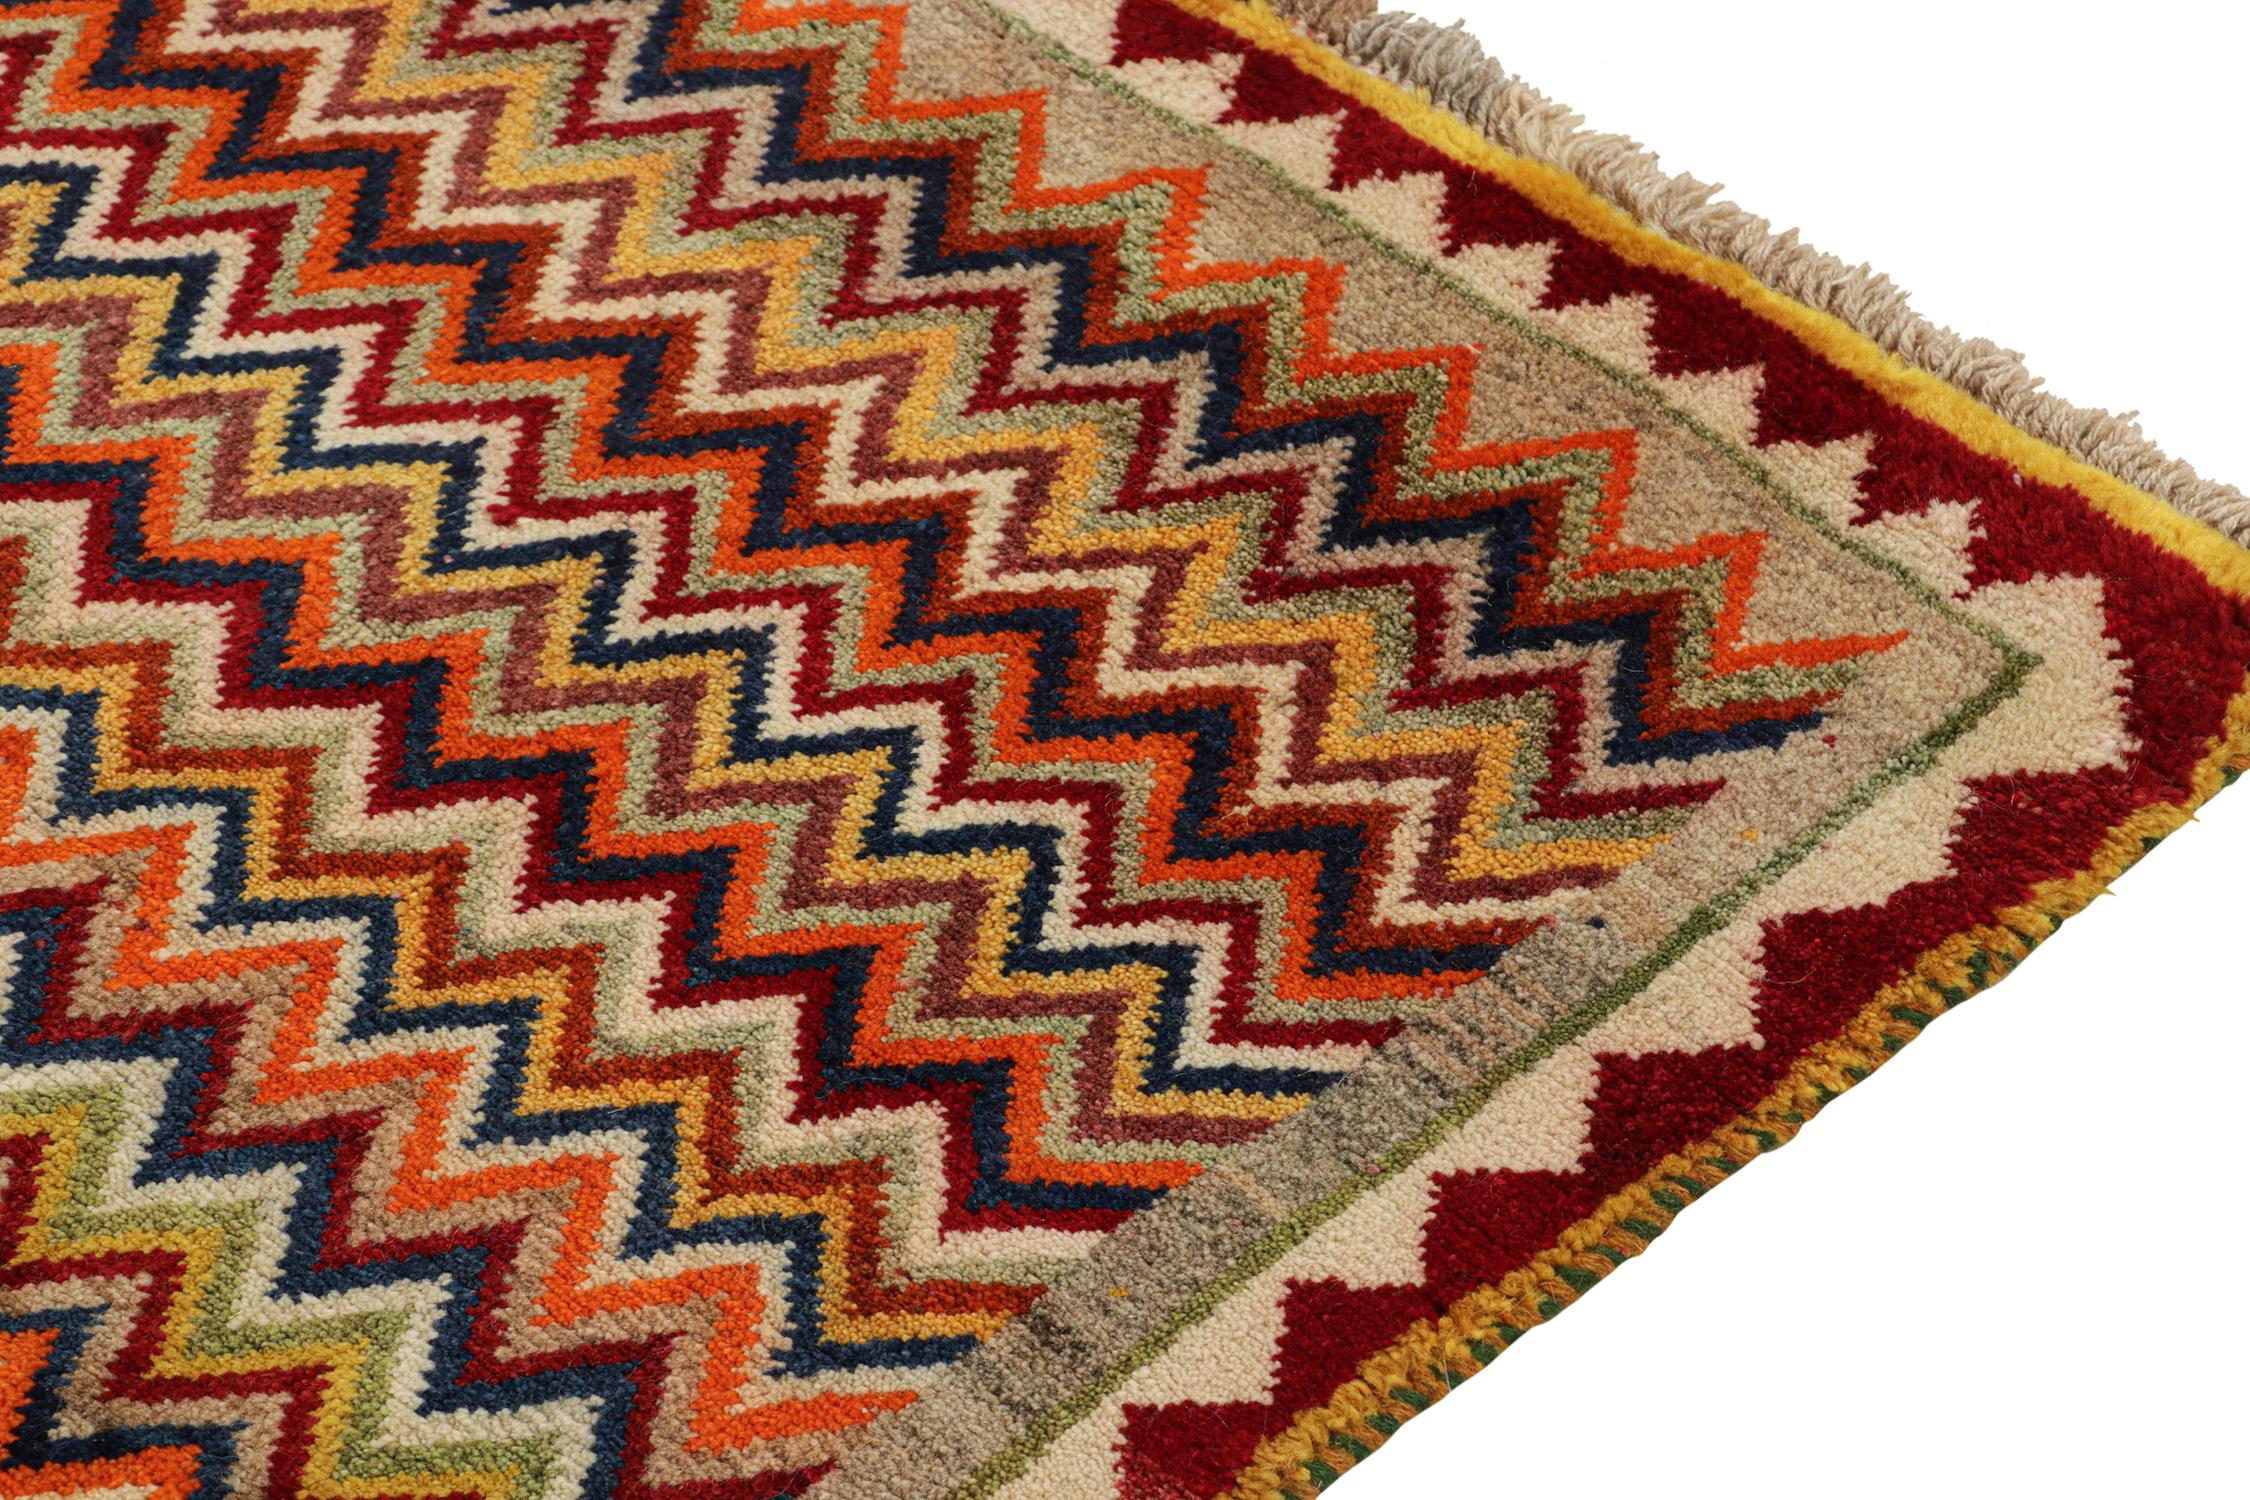 Mid-20th Century Vintage Gabbeh Persian Tribal Rug in Vibrant Chevron Patterns by Rug & Kilim For Sale